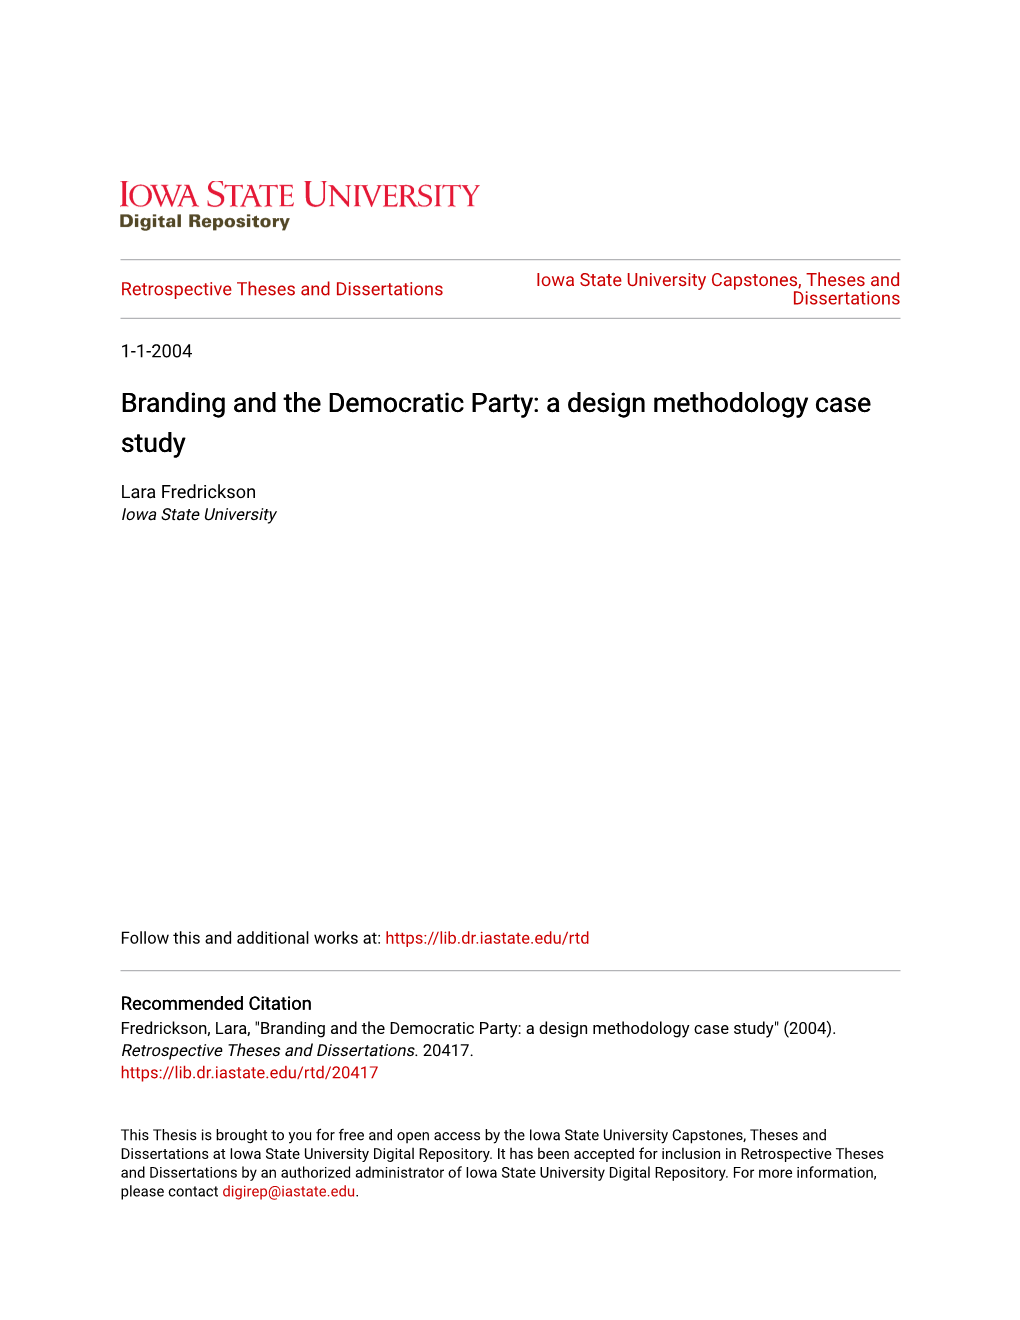 Branding and the Democratic Party: a Design Methodology Case Study